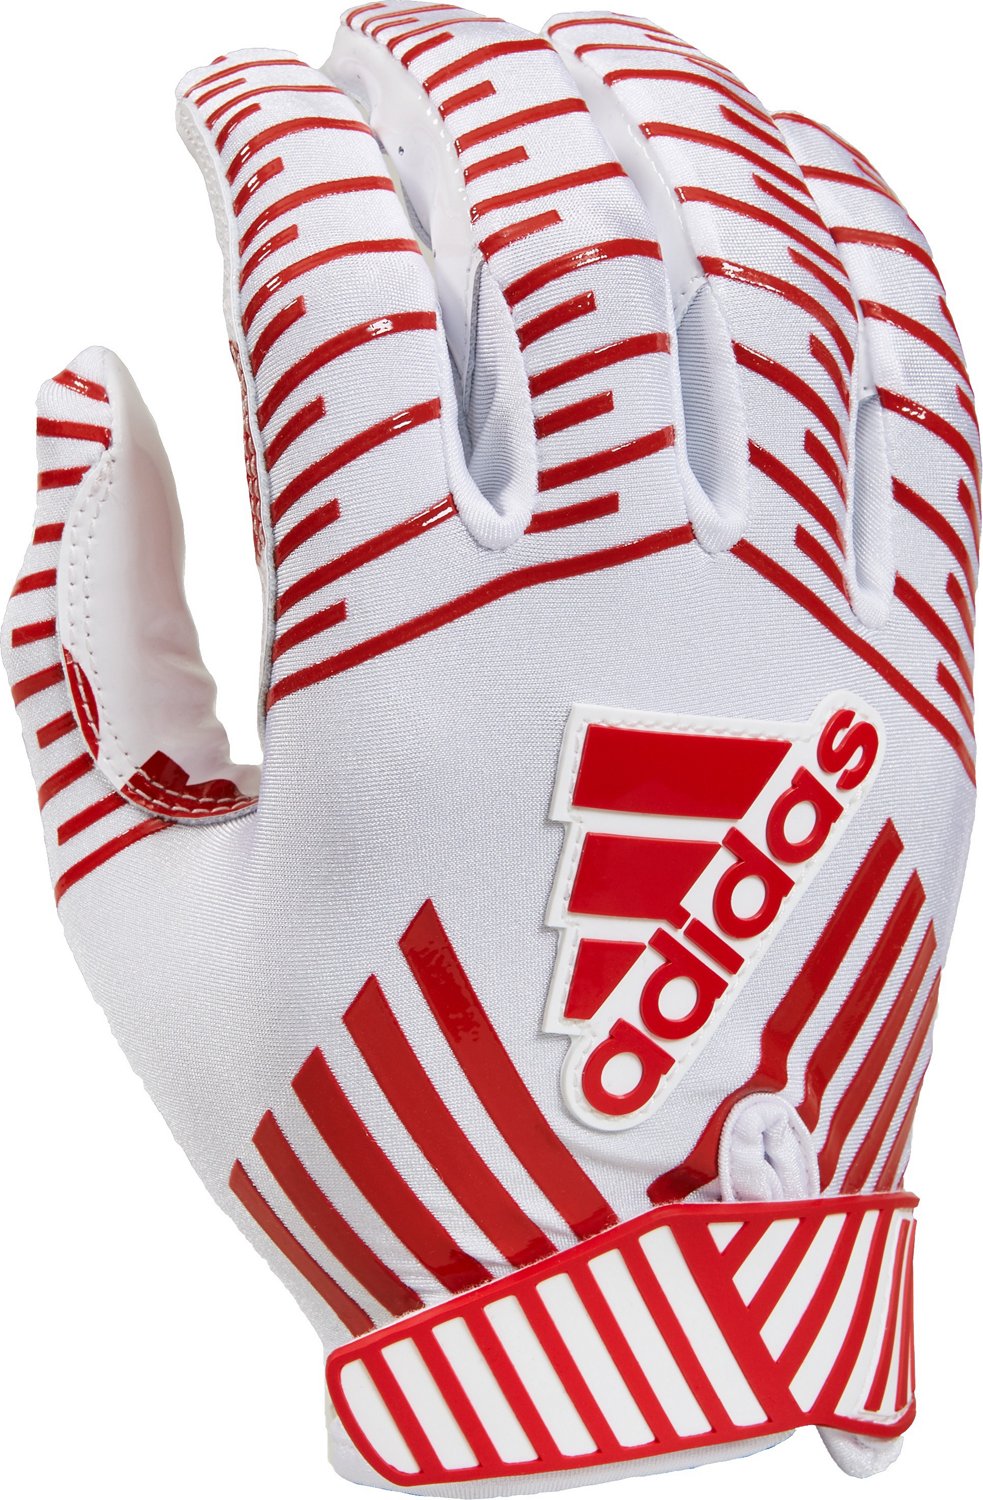 adidas filthy quick 3.0 gloves